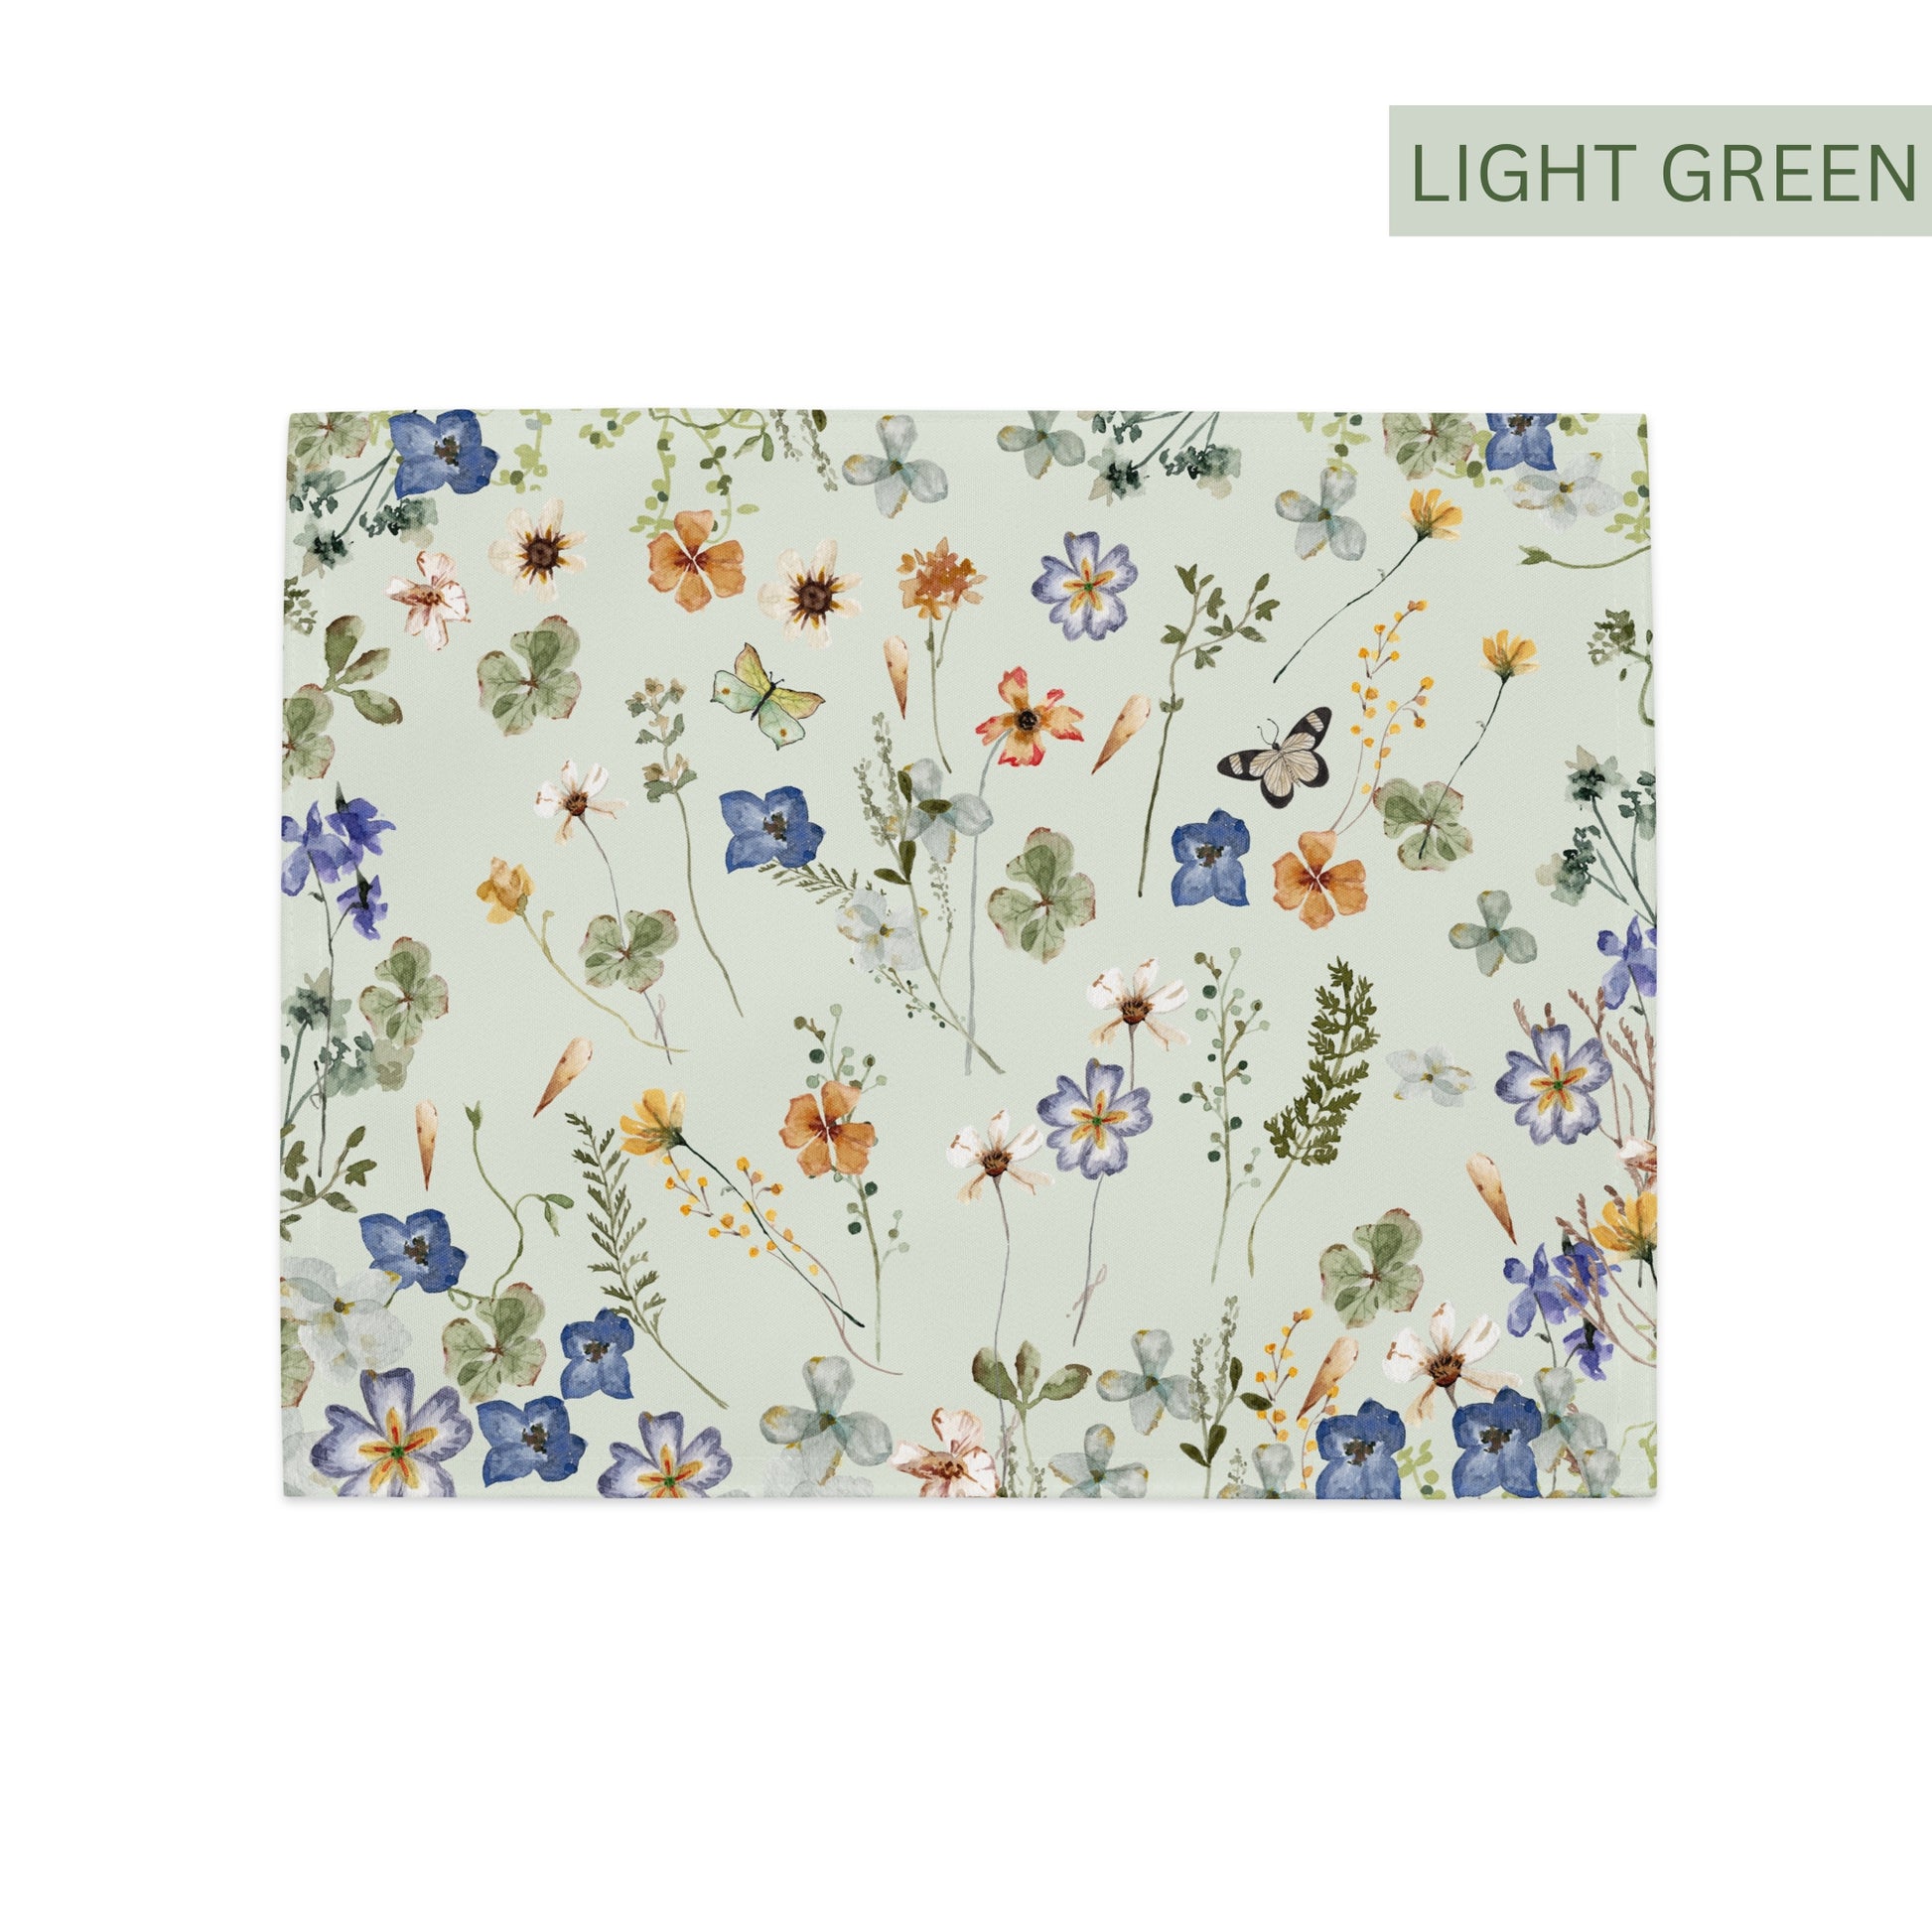 Wildflowers Floral PLACEMAT - Green Tone from BLUE WATER SONGS